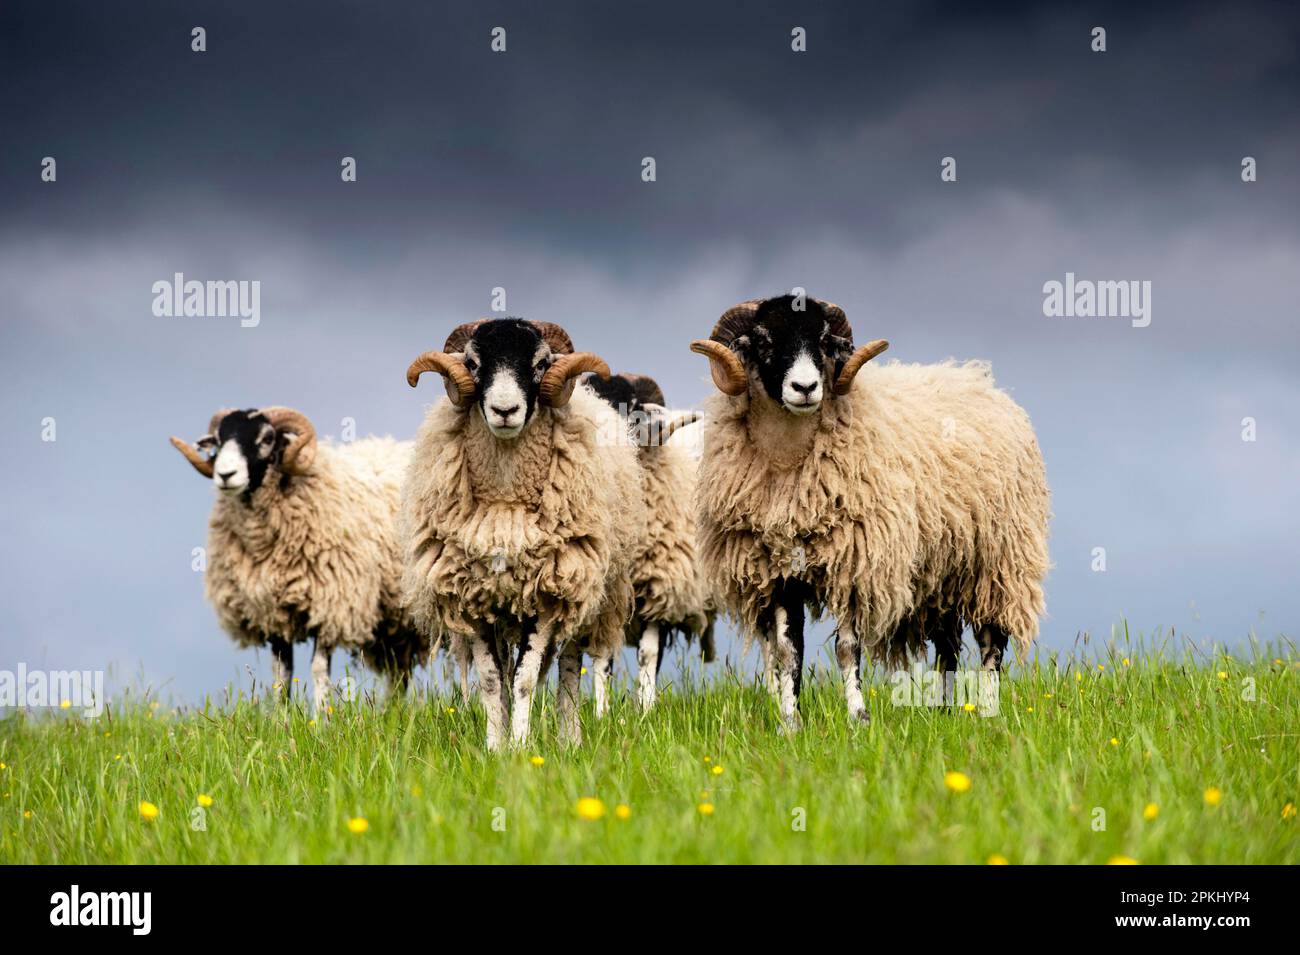 Domestic Sheep, Swaledale yearling tups in wool, standing in pasture on hilltop, England, United Kingdom Stock Photo